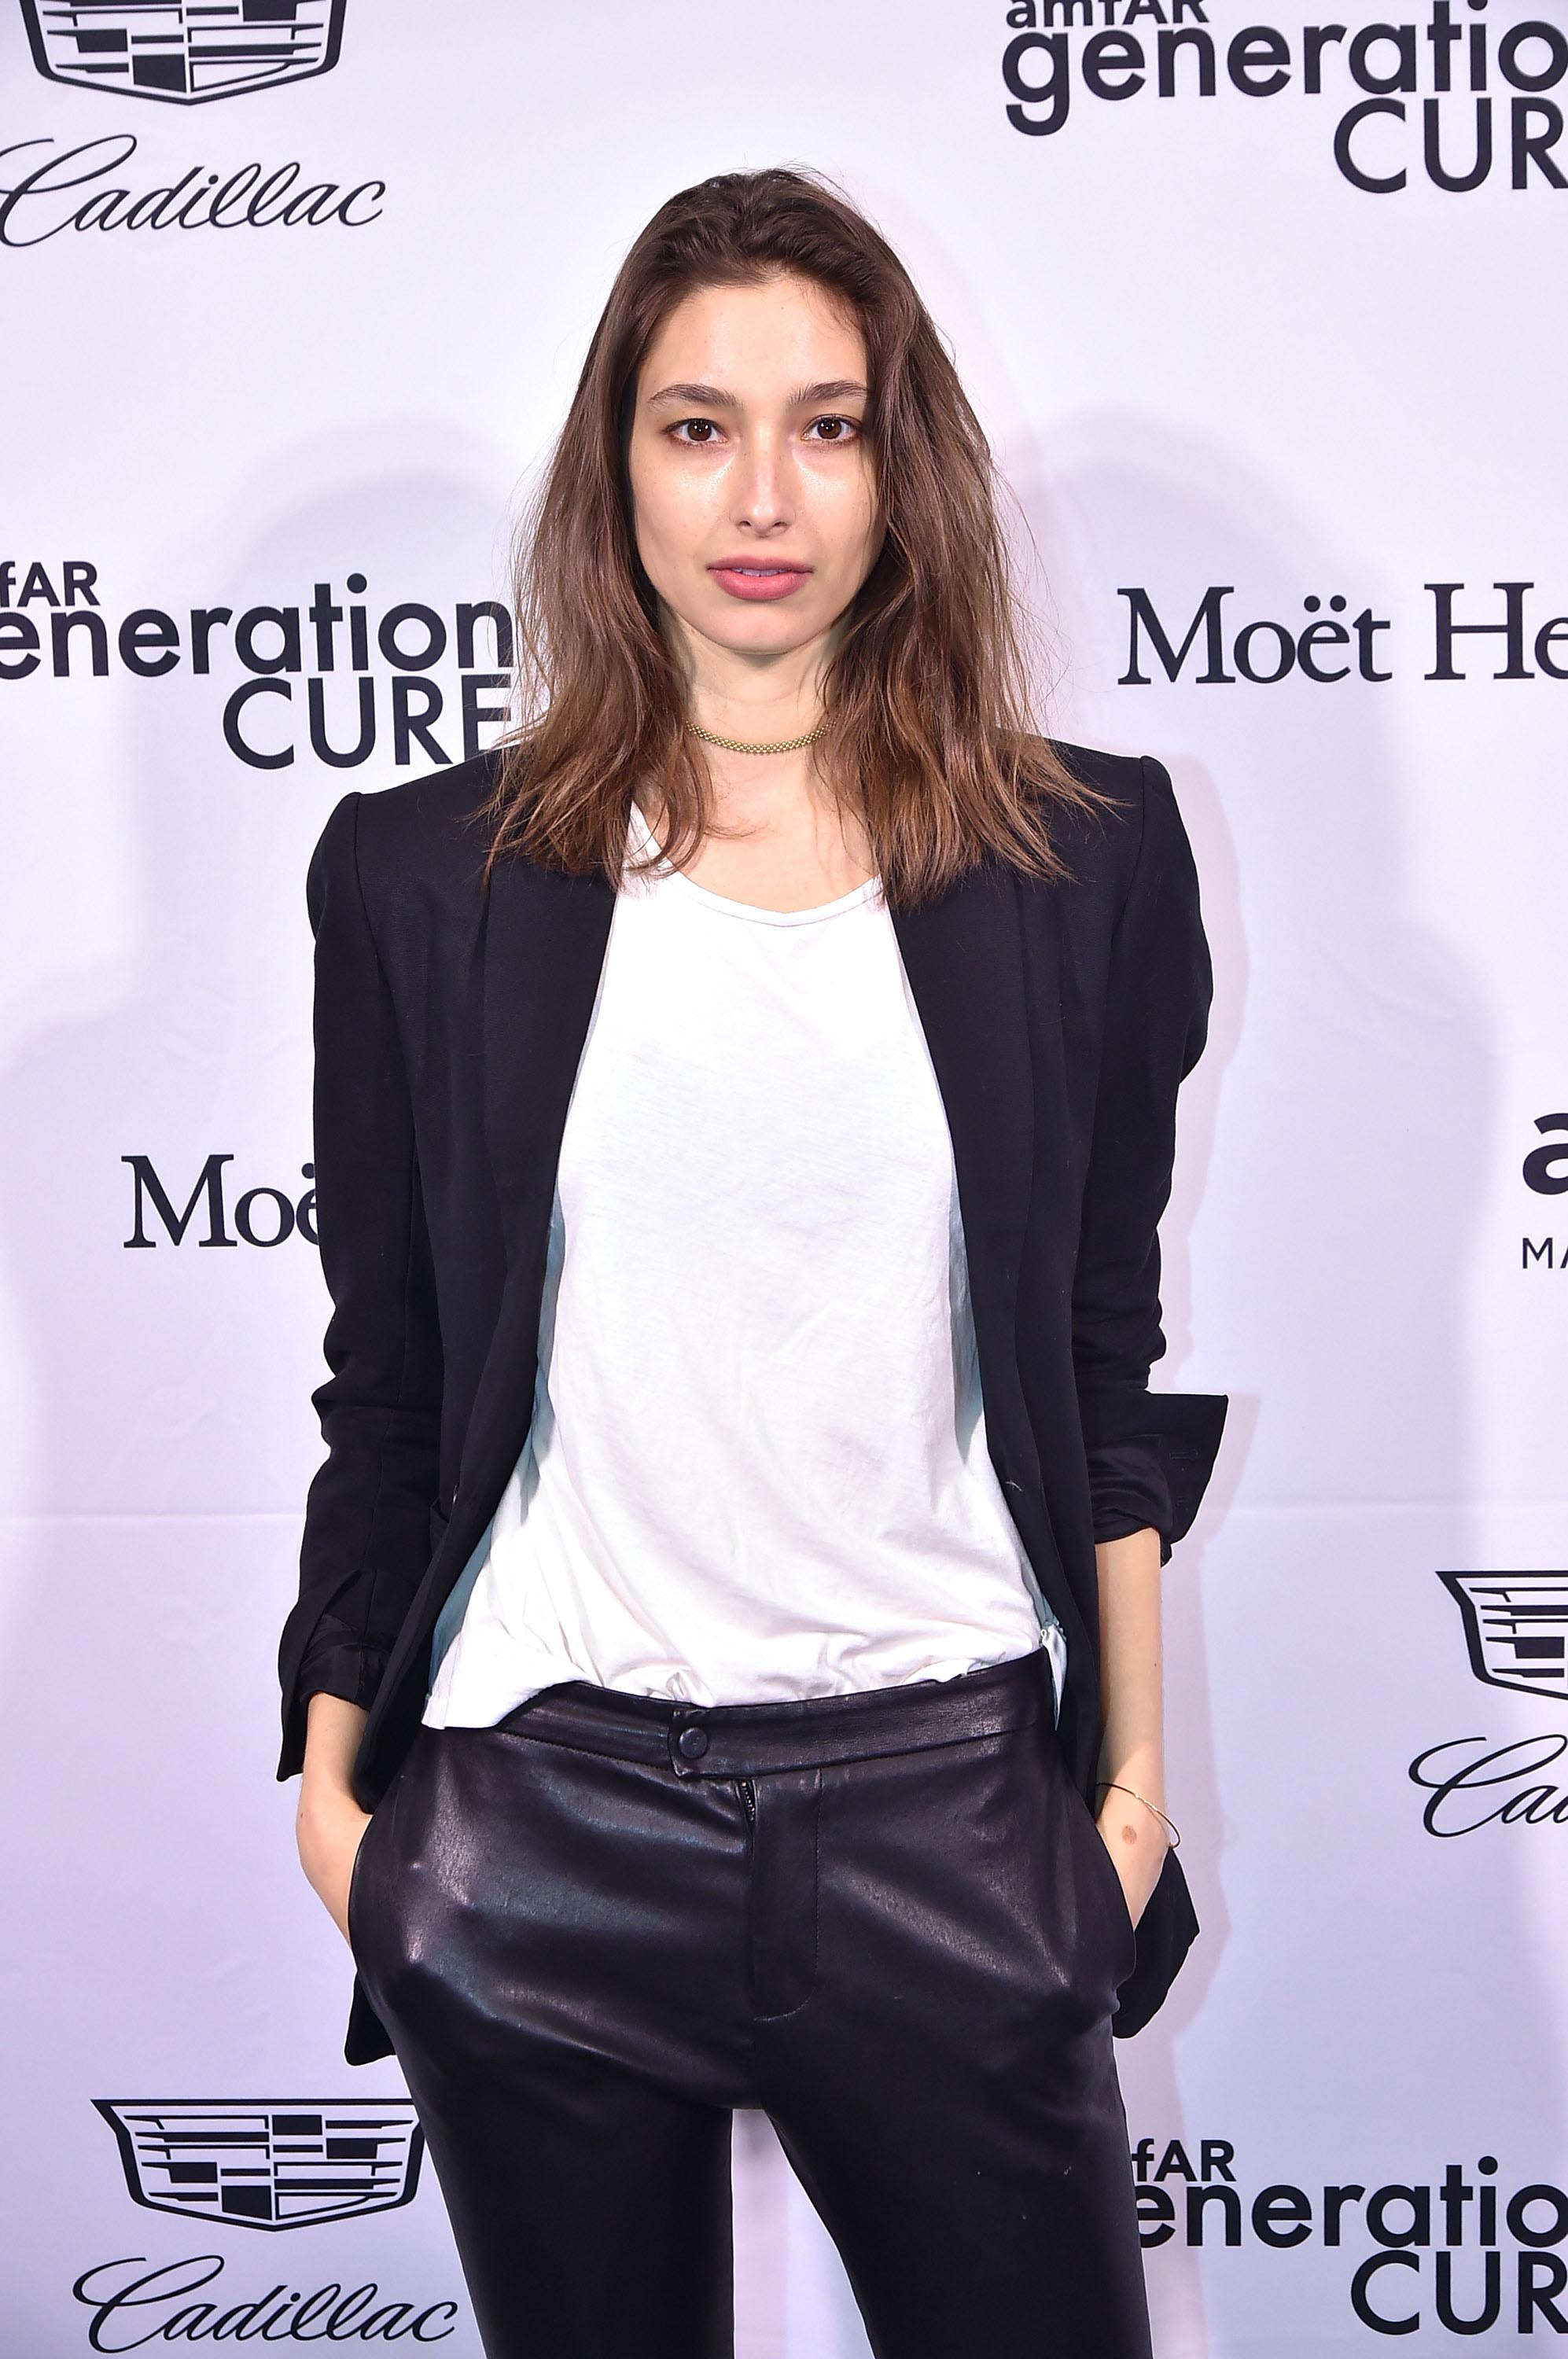 Alexandra Agoston attends the 2016 amfAR GenerationCure Holiday Party